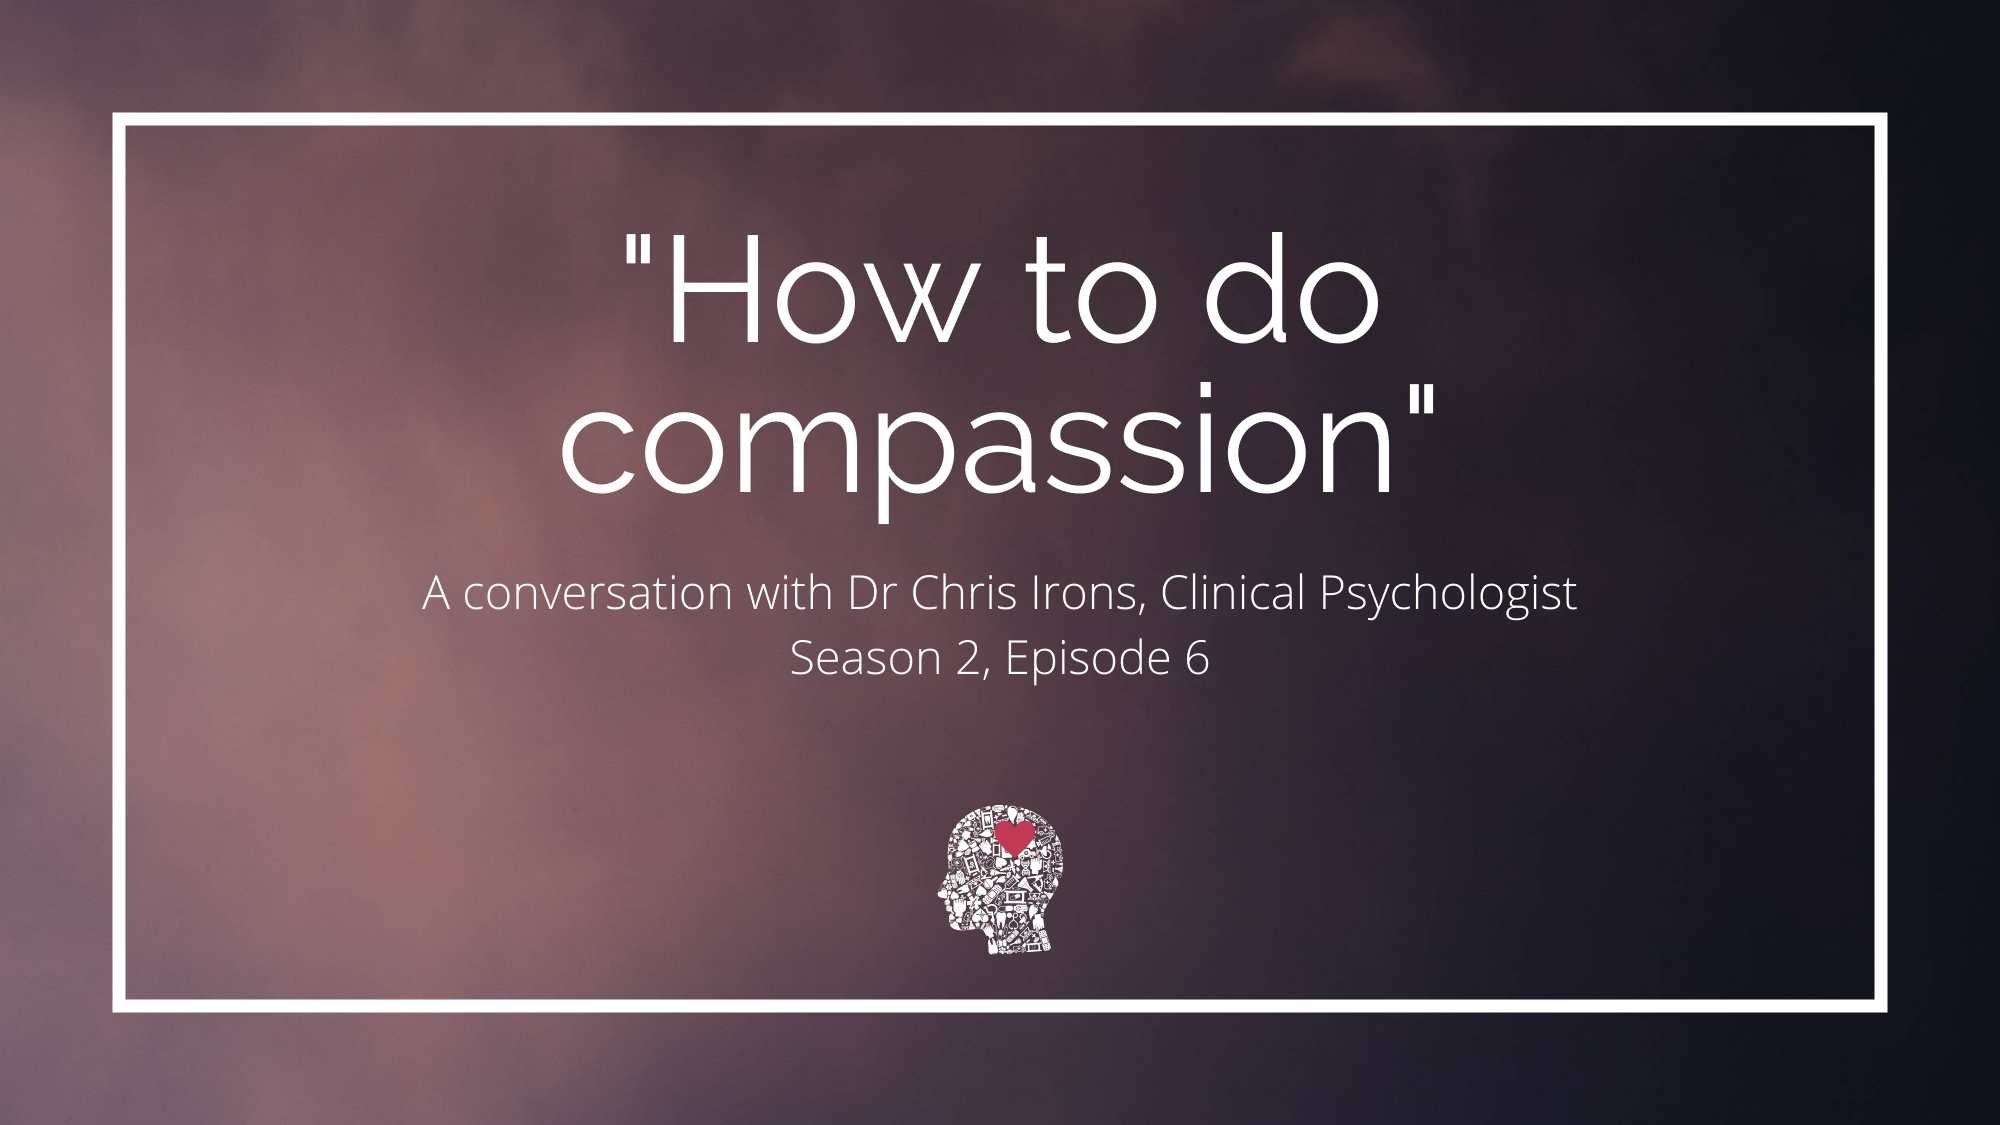 When Work Hurts podcast Season 2 Episode 6 Dr Chris Irons on How to do Compassion